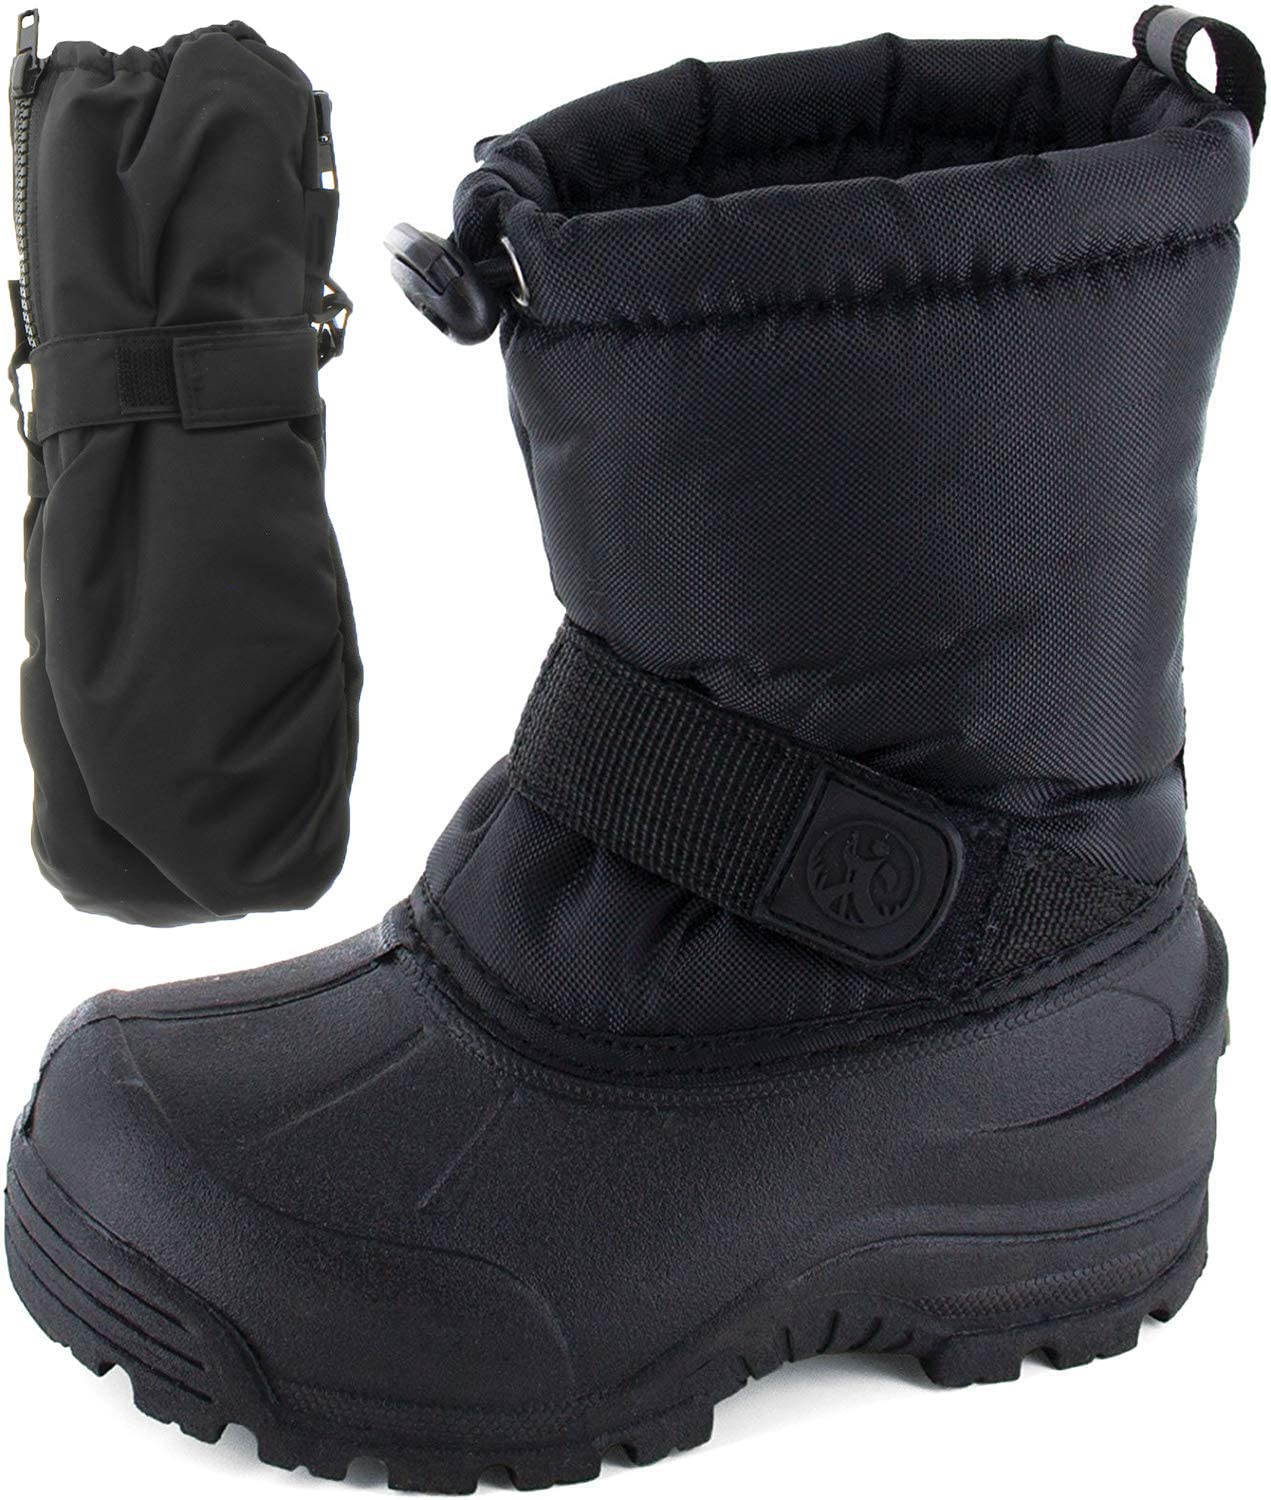 Northside Frosty Winter Snow Boots for Boys/Girls with Matching Waterproof Mittens, Size: 11 M US Little Kid - Black (Black)